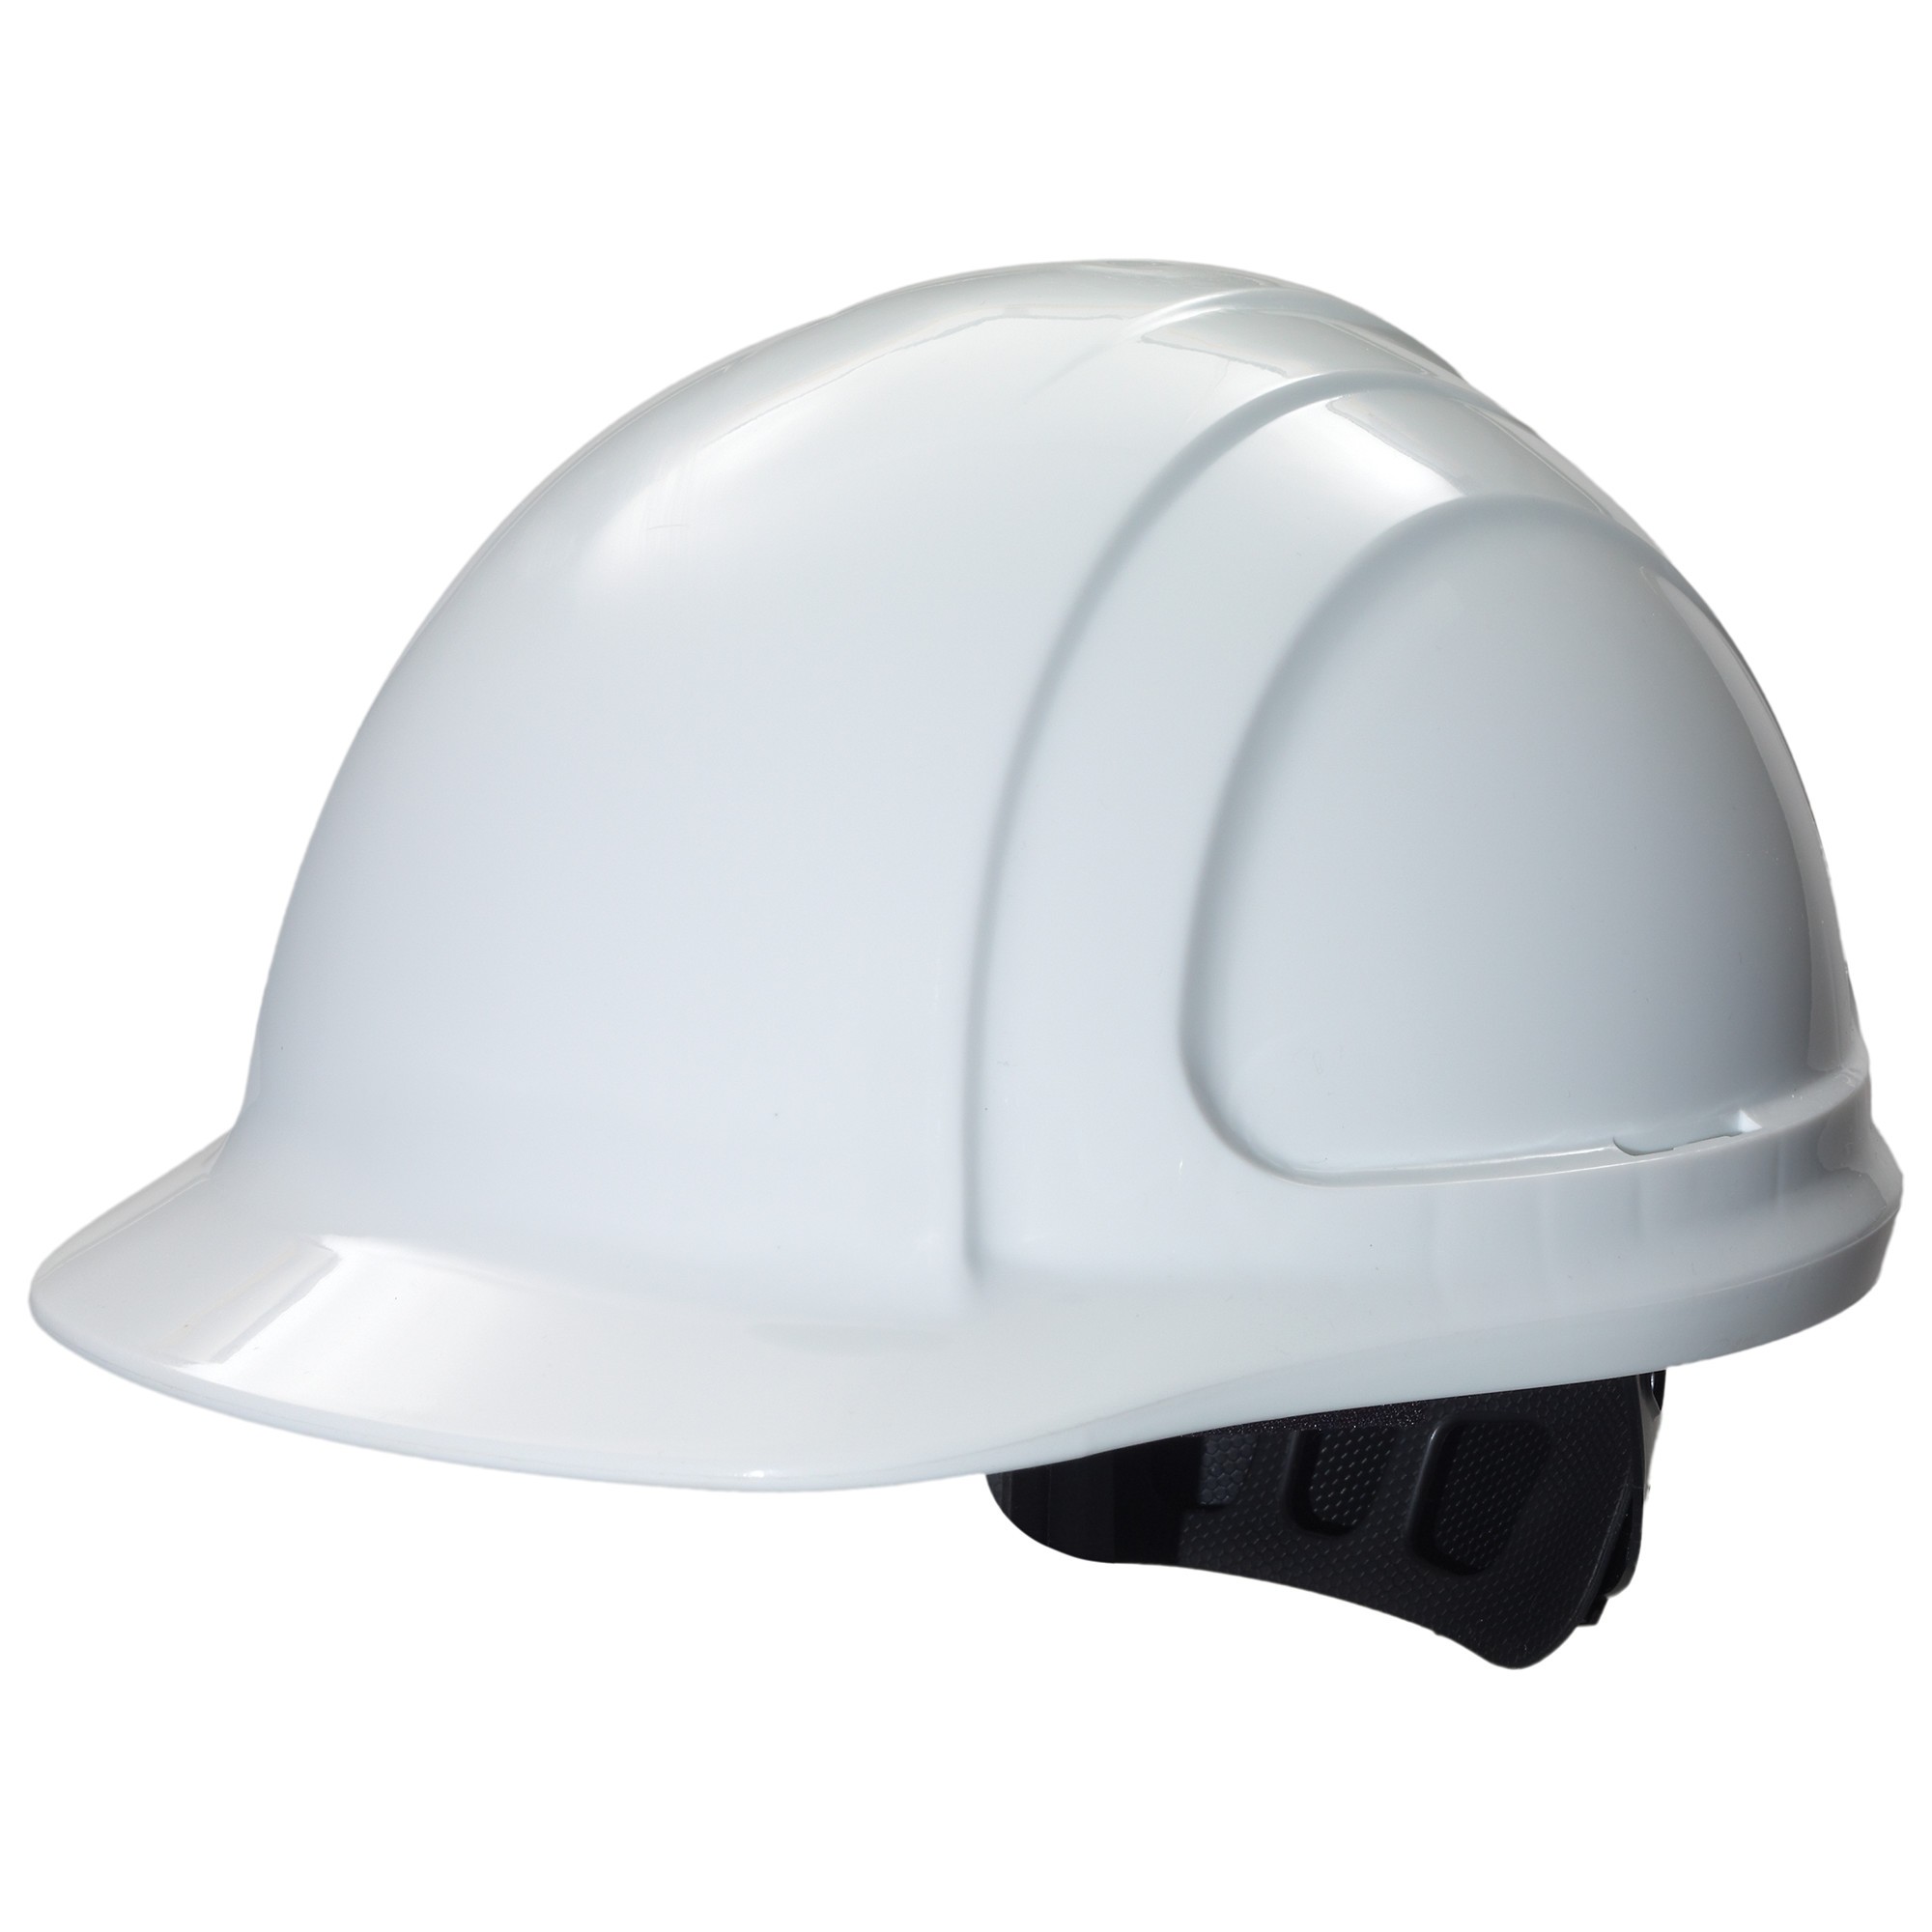 Occunomix Lm660 Fleece Hard Hat Liner With Mouthpiece